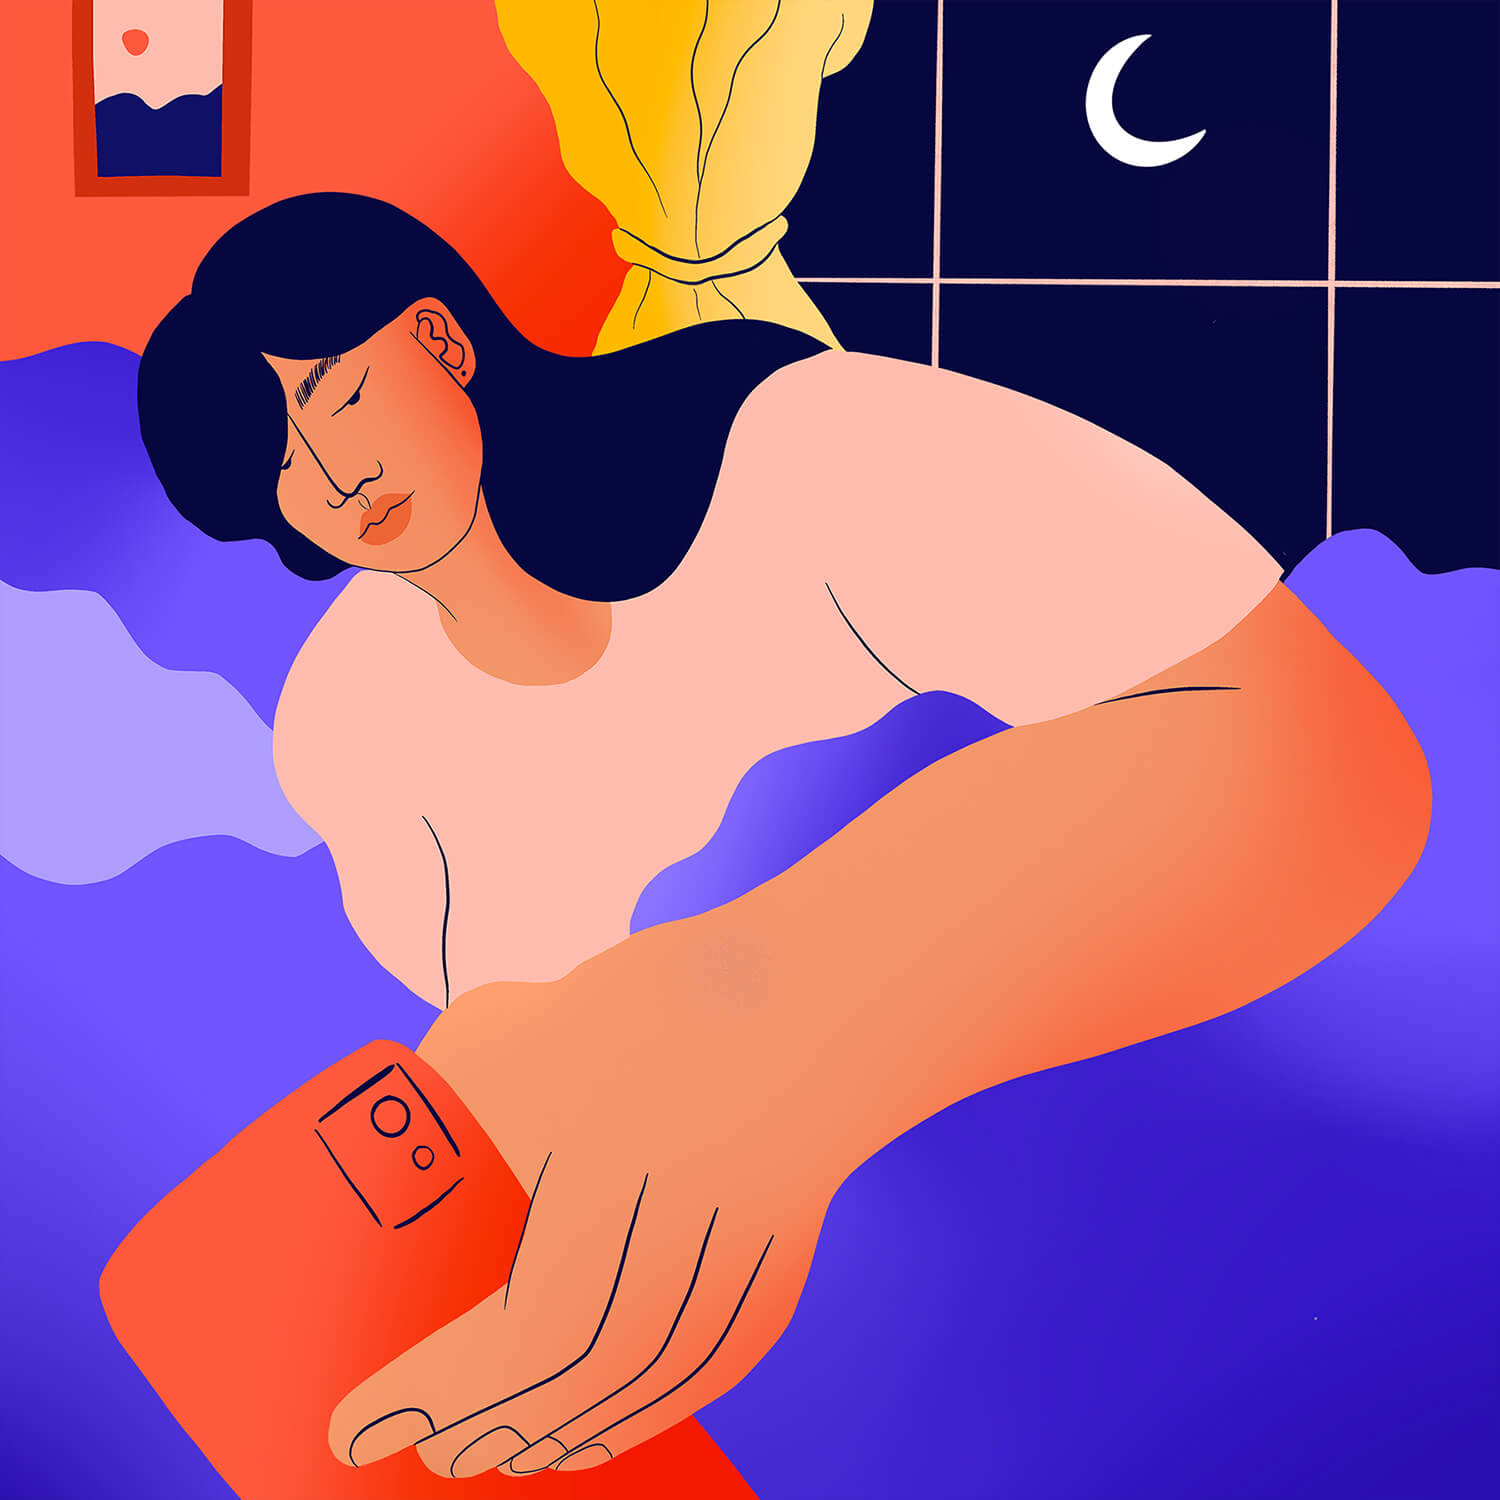 Illustration of young person at home in bed, looking at their phone with a serious expression